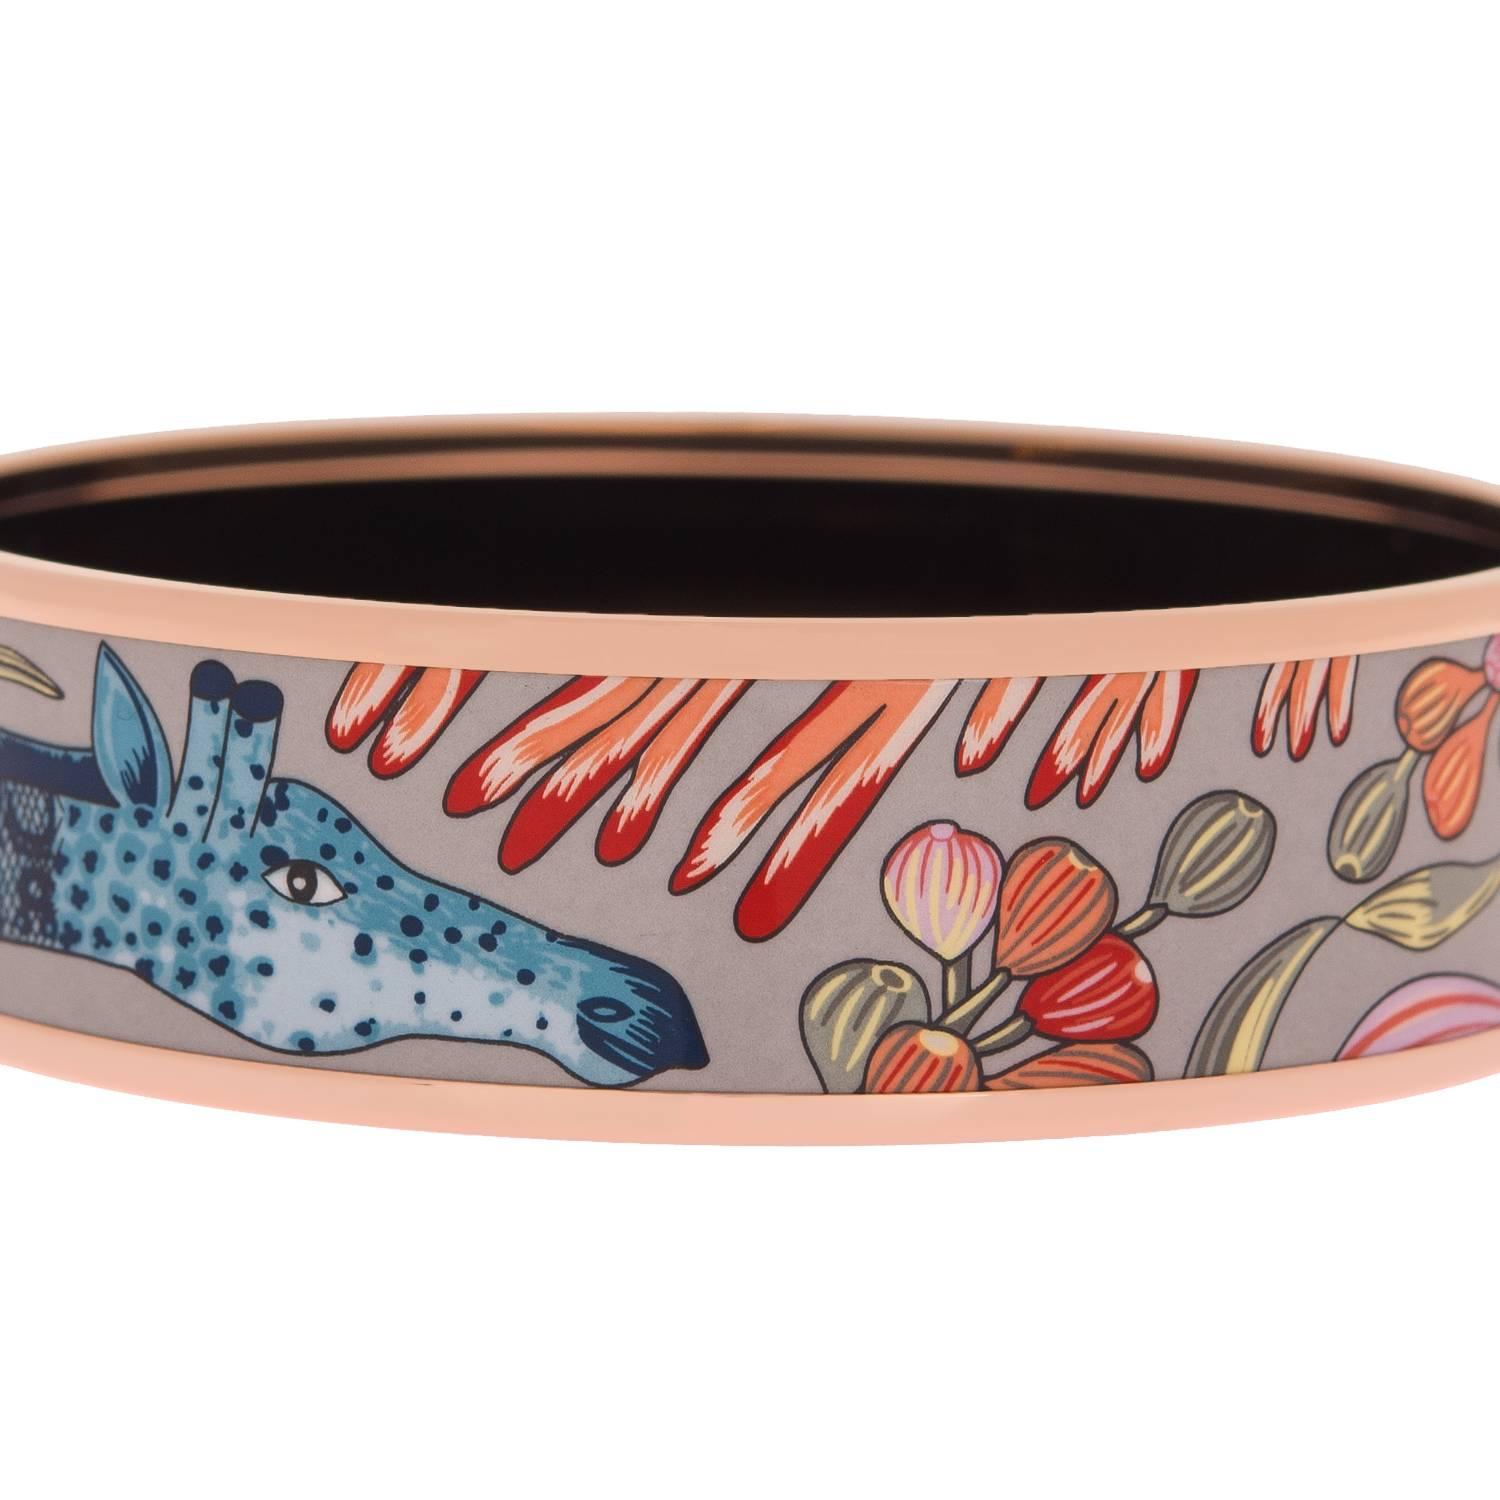 Hermes "La Marche De Savanna" wide printed enamel bracelet size PM (65).
 
This bracelet depicts a giraffe and flowers in a blue background with rose gold plated hardware. 

Origin: France
 
Condition: Never Worn
 
Accompanied by: Hermes